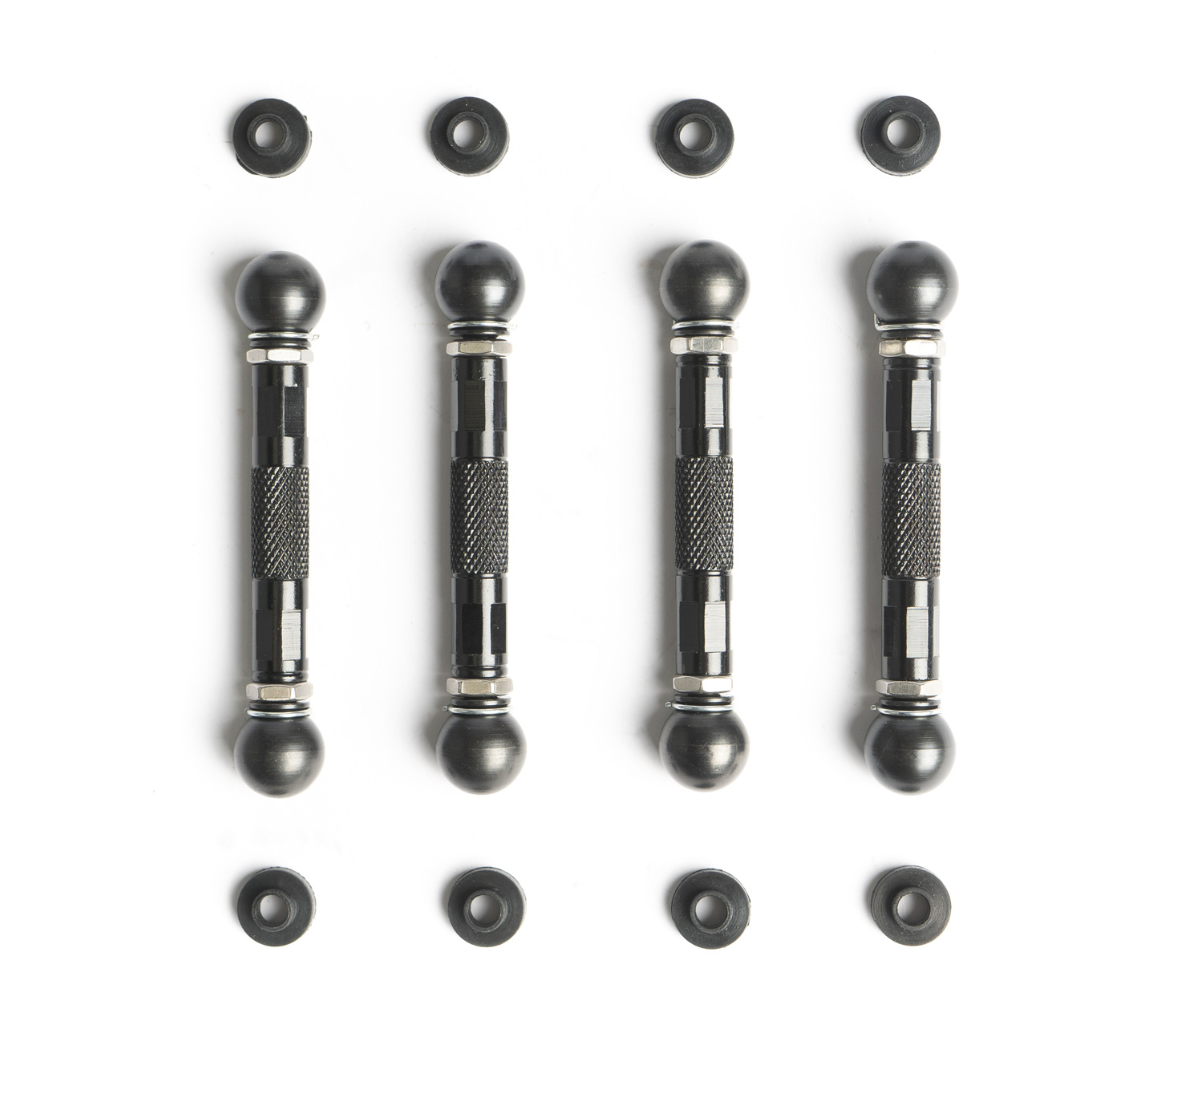 CTS Turbo Adjustable Lowering Links - Audi C7/D4 A6/A7/S6/S7/S8 With Air Suspension